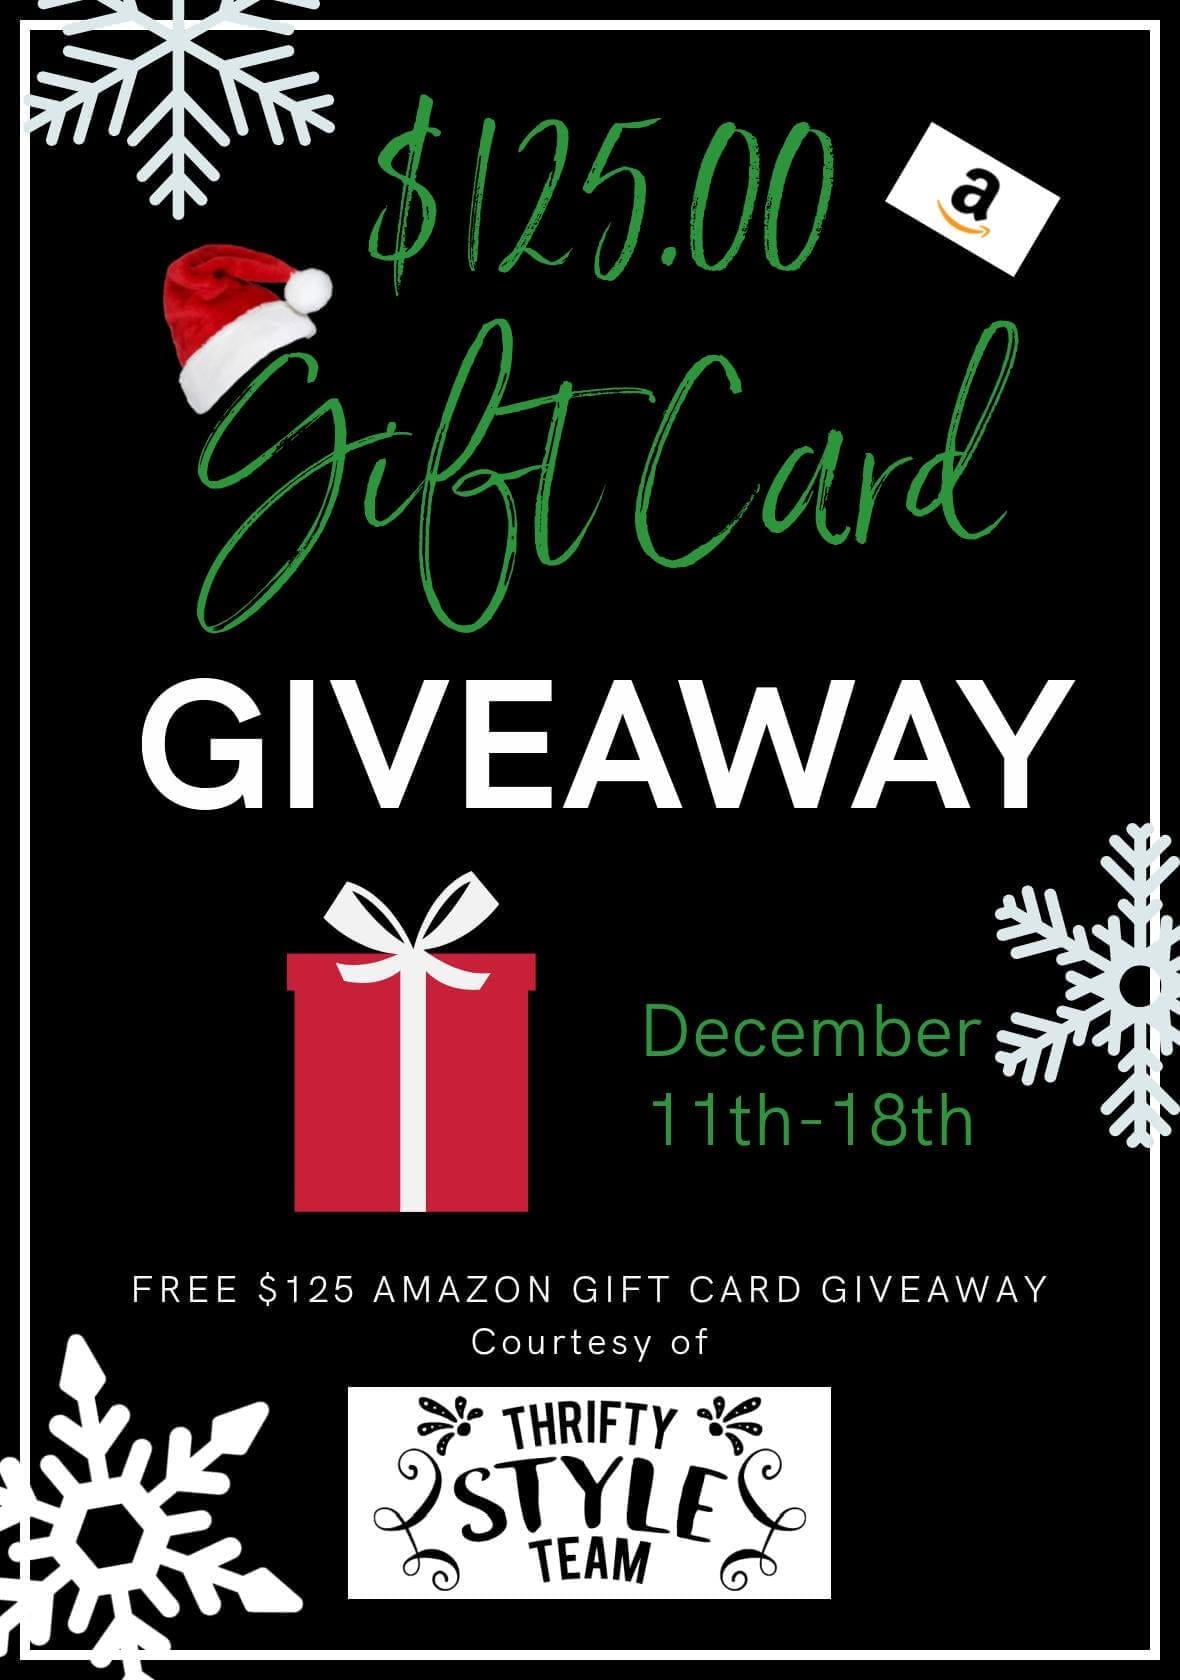 Thrifty Style Team $125 Amazon Gift Gard Giveaway